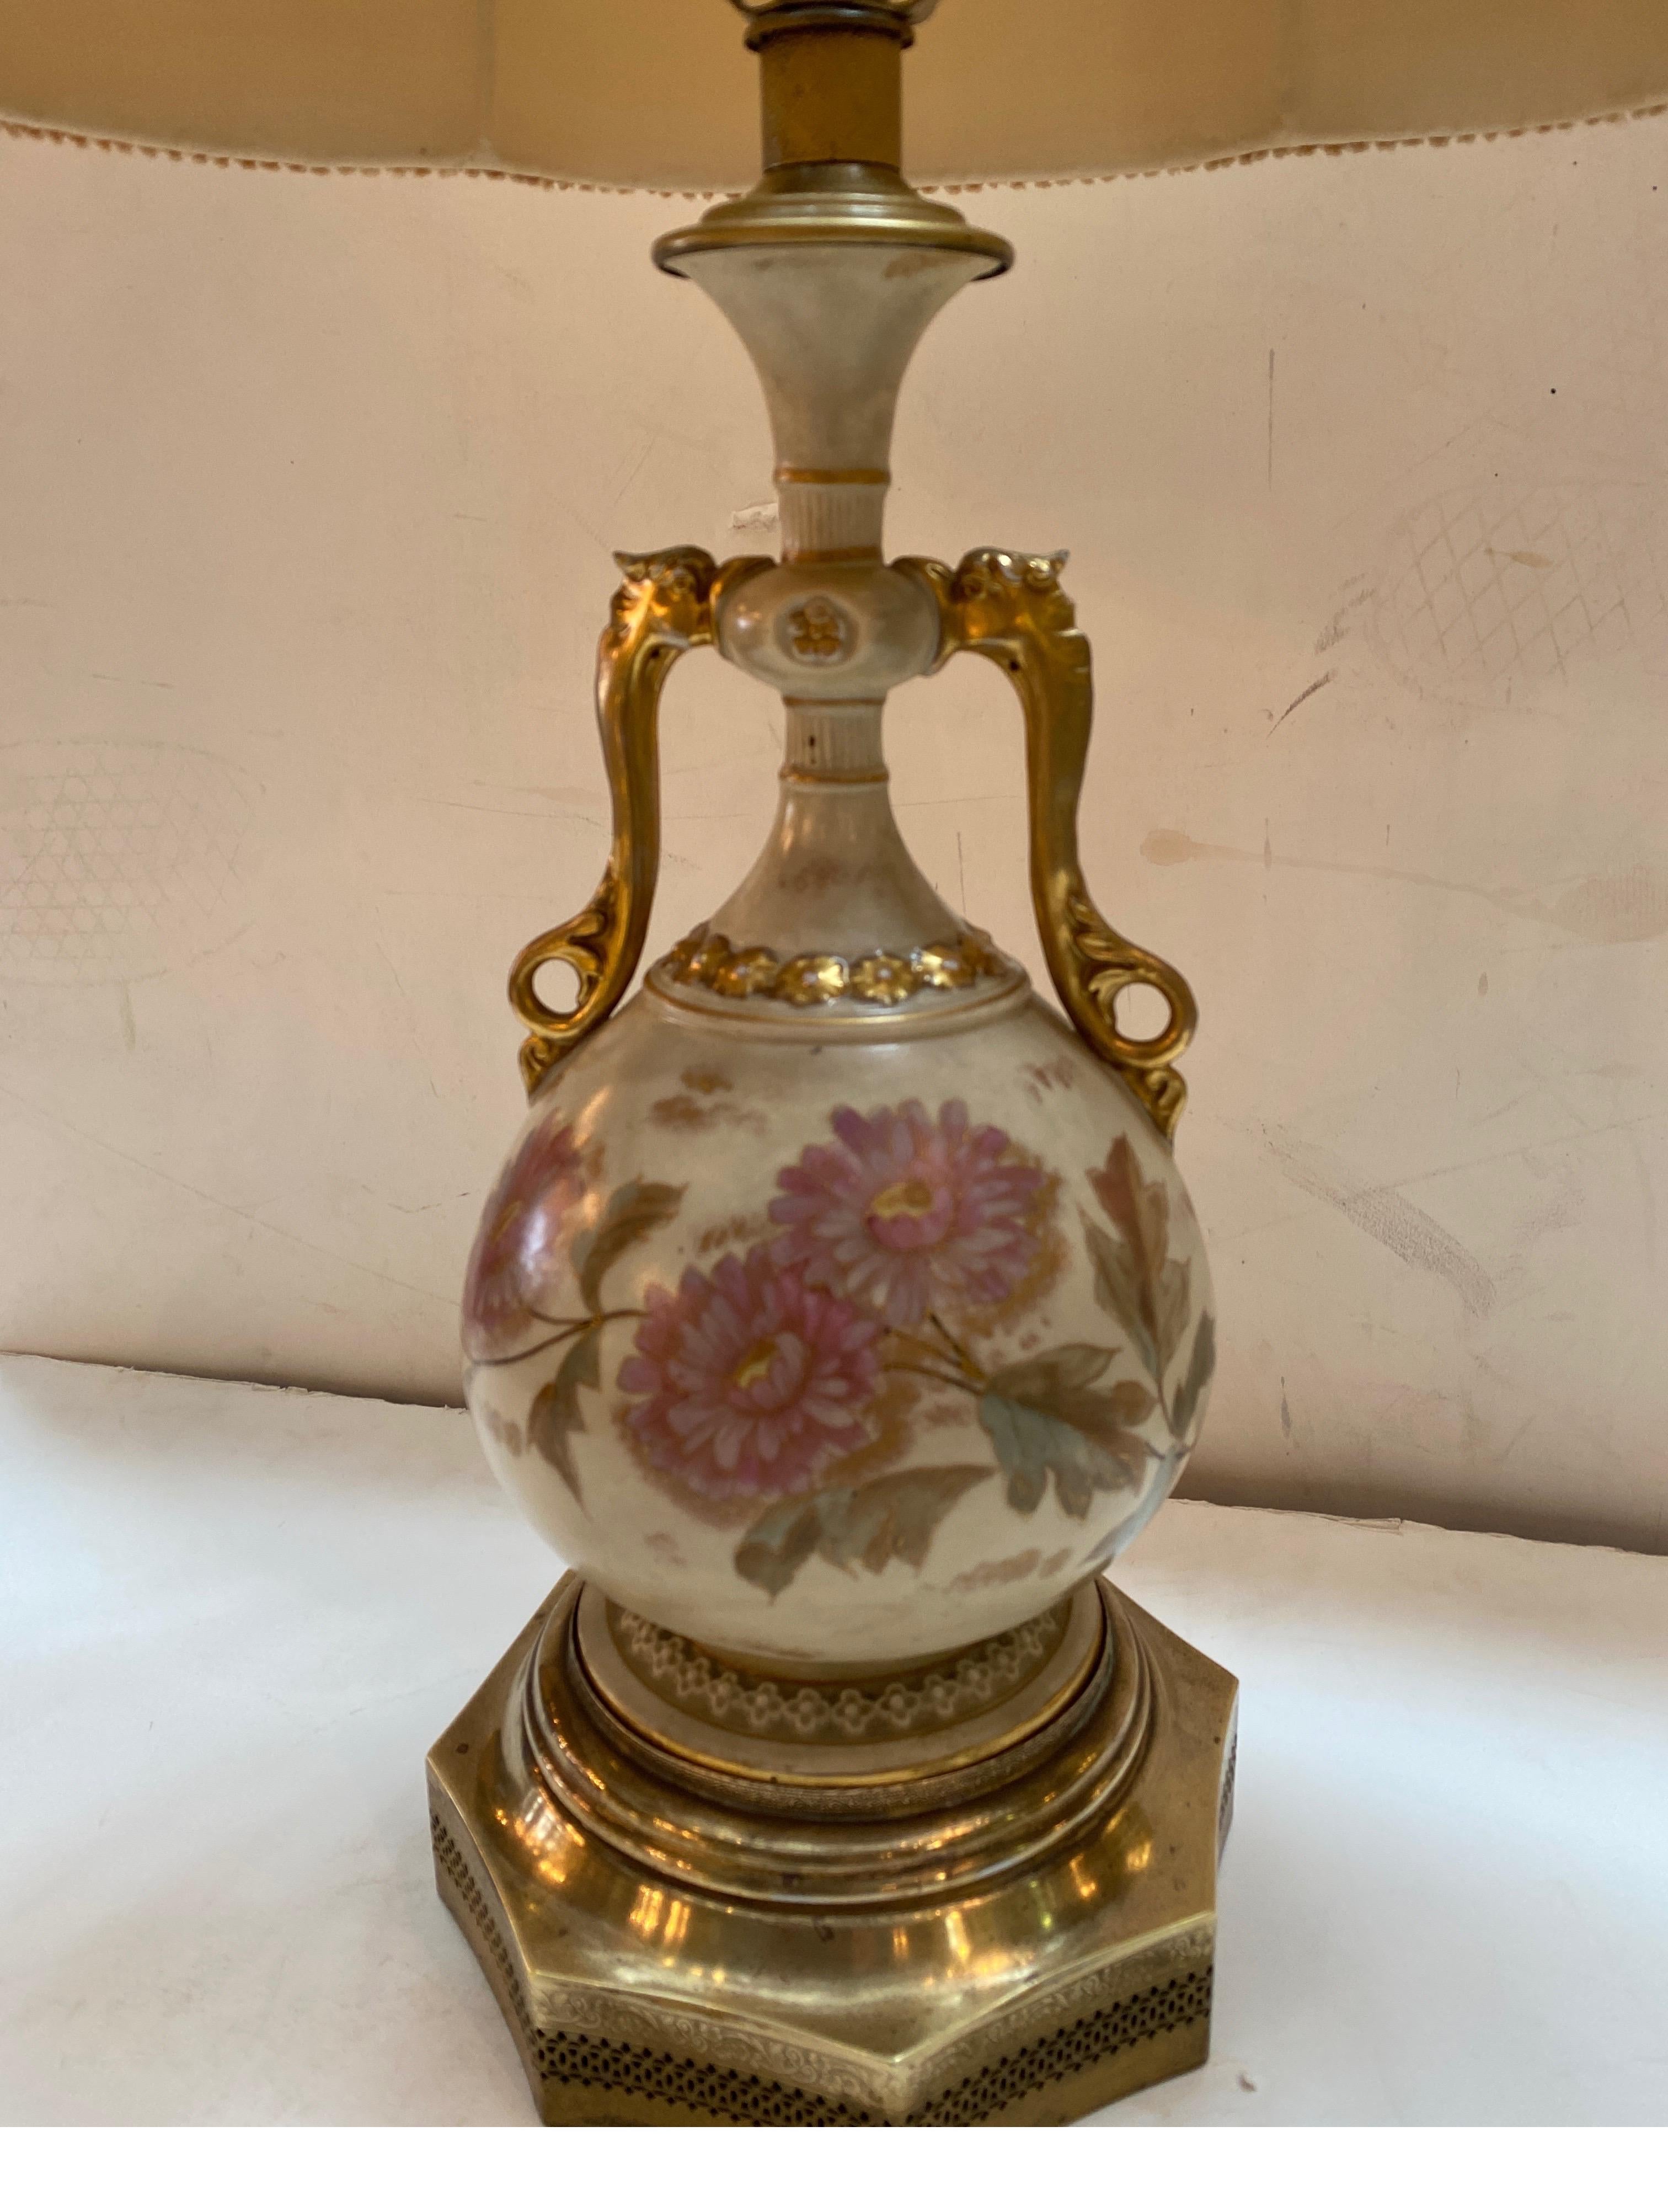 A 19th century English Royal Worchester hand painted vase now as a lamp, The gilt handled floral decorated vase with polished brass base from the around 1880, lamped in the 1920's with a custom brass pierced base. The shade is for photographic